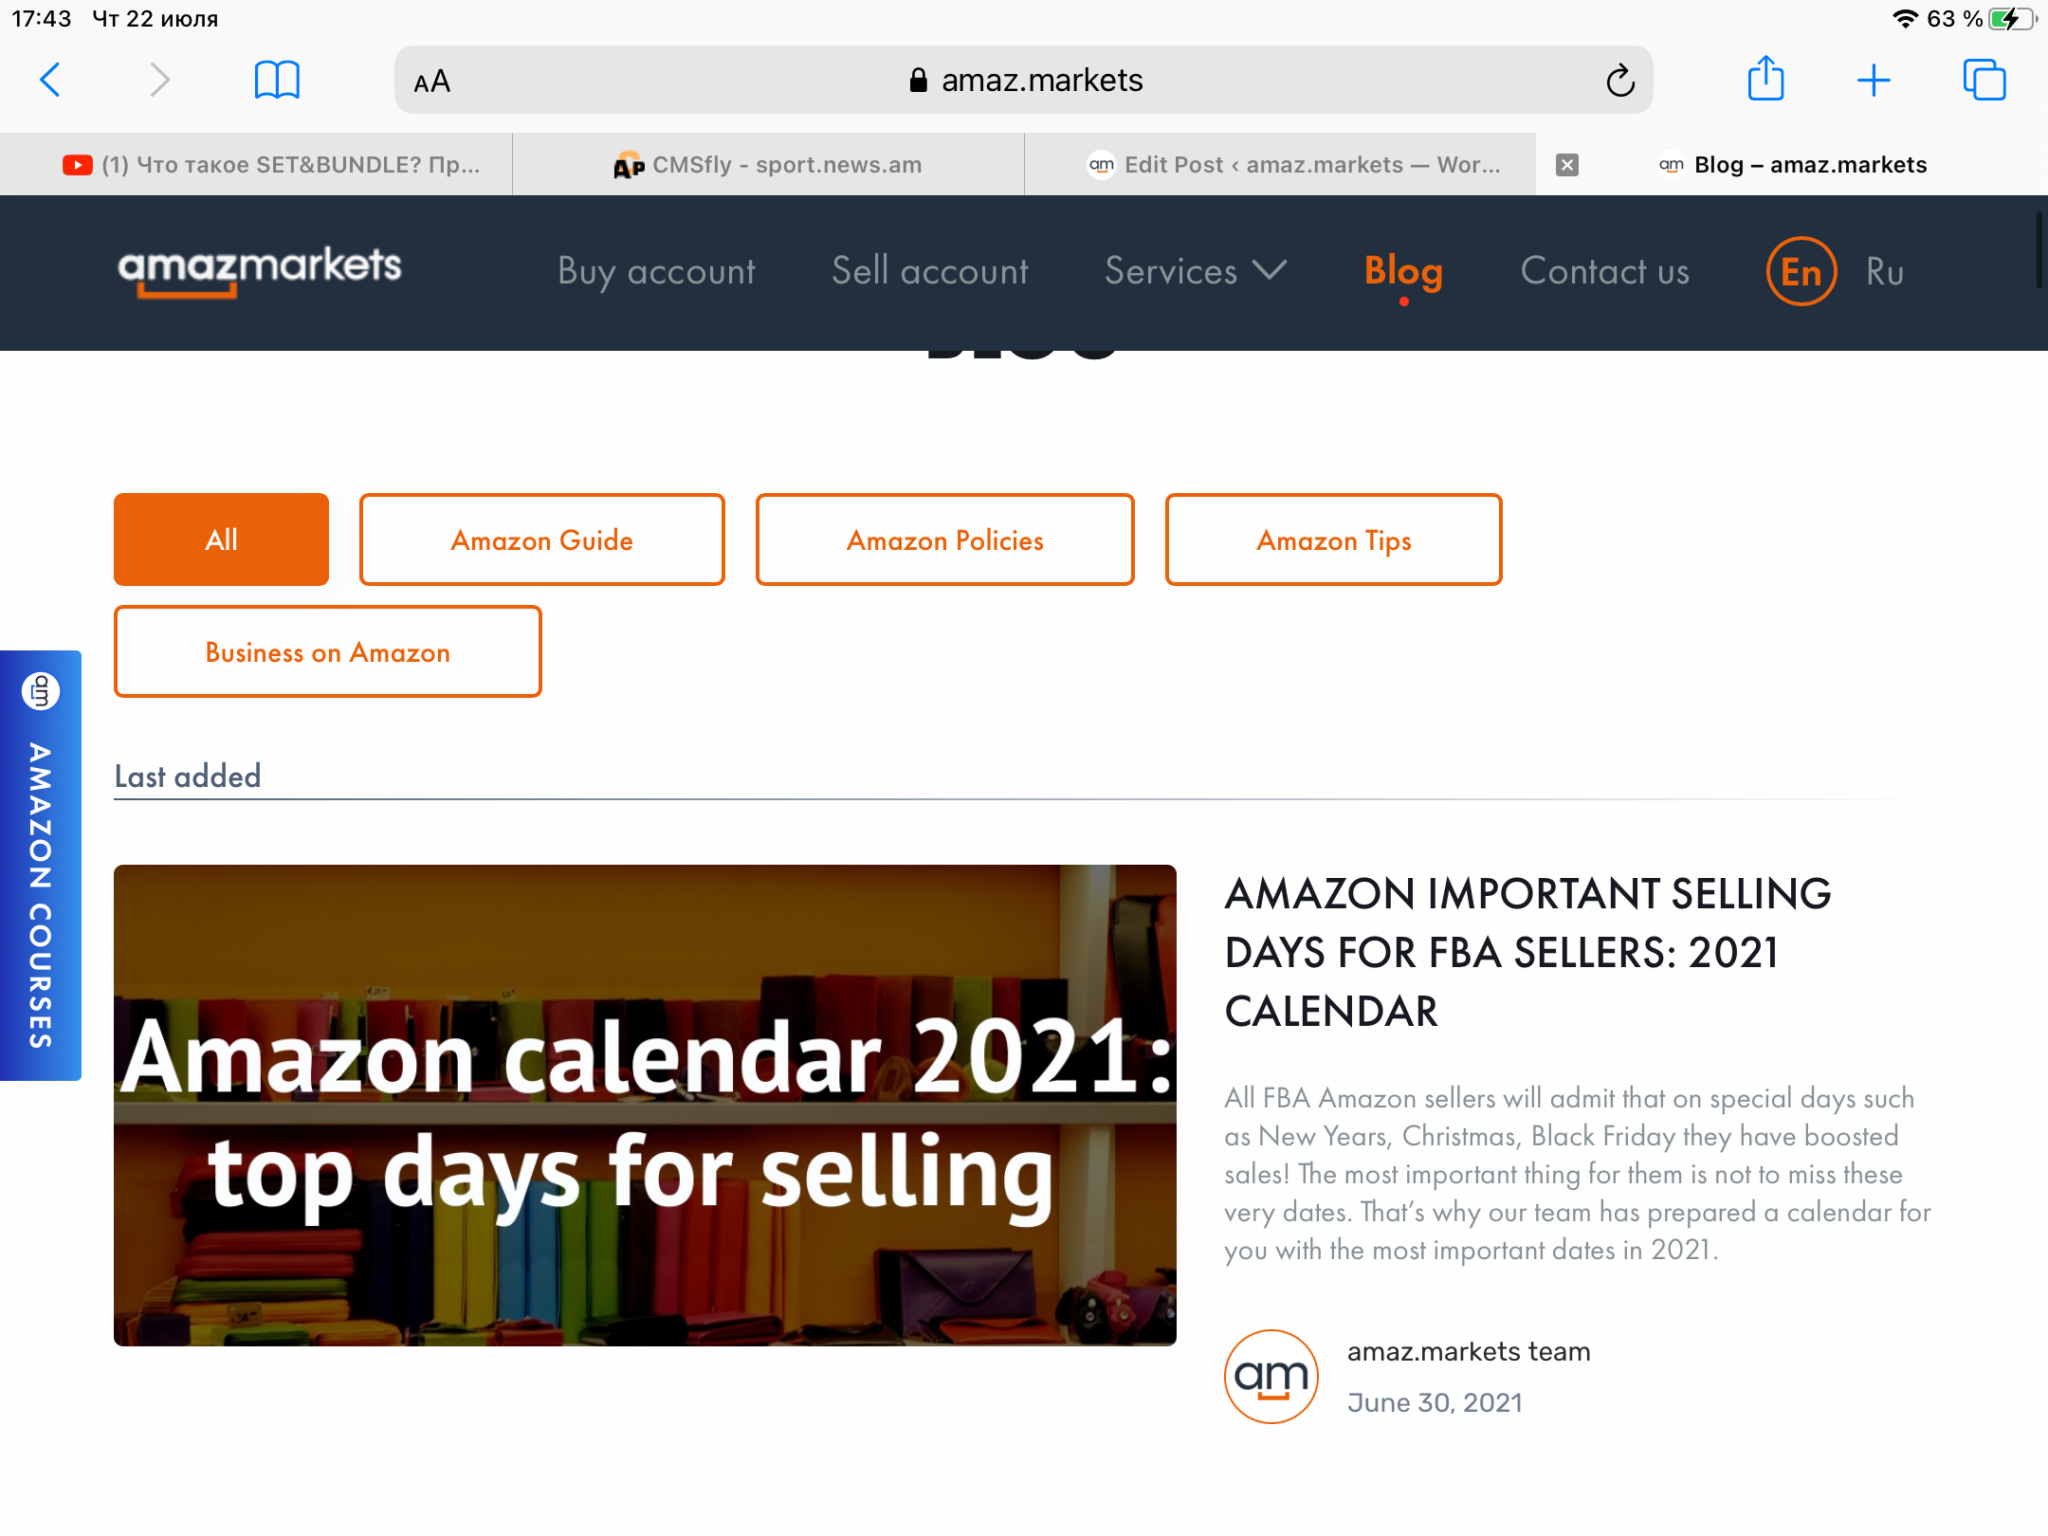 Amazon FBA, Amazon repricing, business on amazon, FBA, FBA repricer, ideal price, listing optimization, manual repricing, online business, optimised listing, prices on Amazon, re-pricing, re-pricing on Amazon, repricing, repricing on Amazon, What is Amazon repricing?